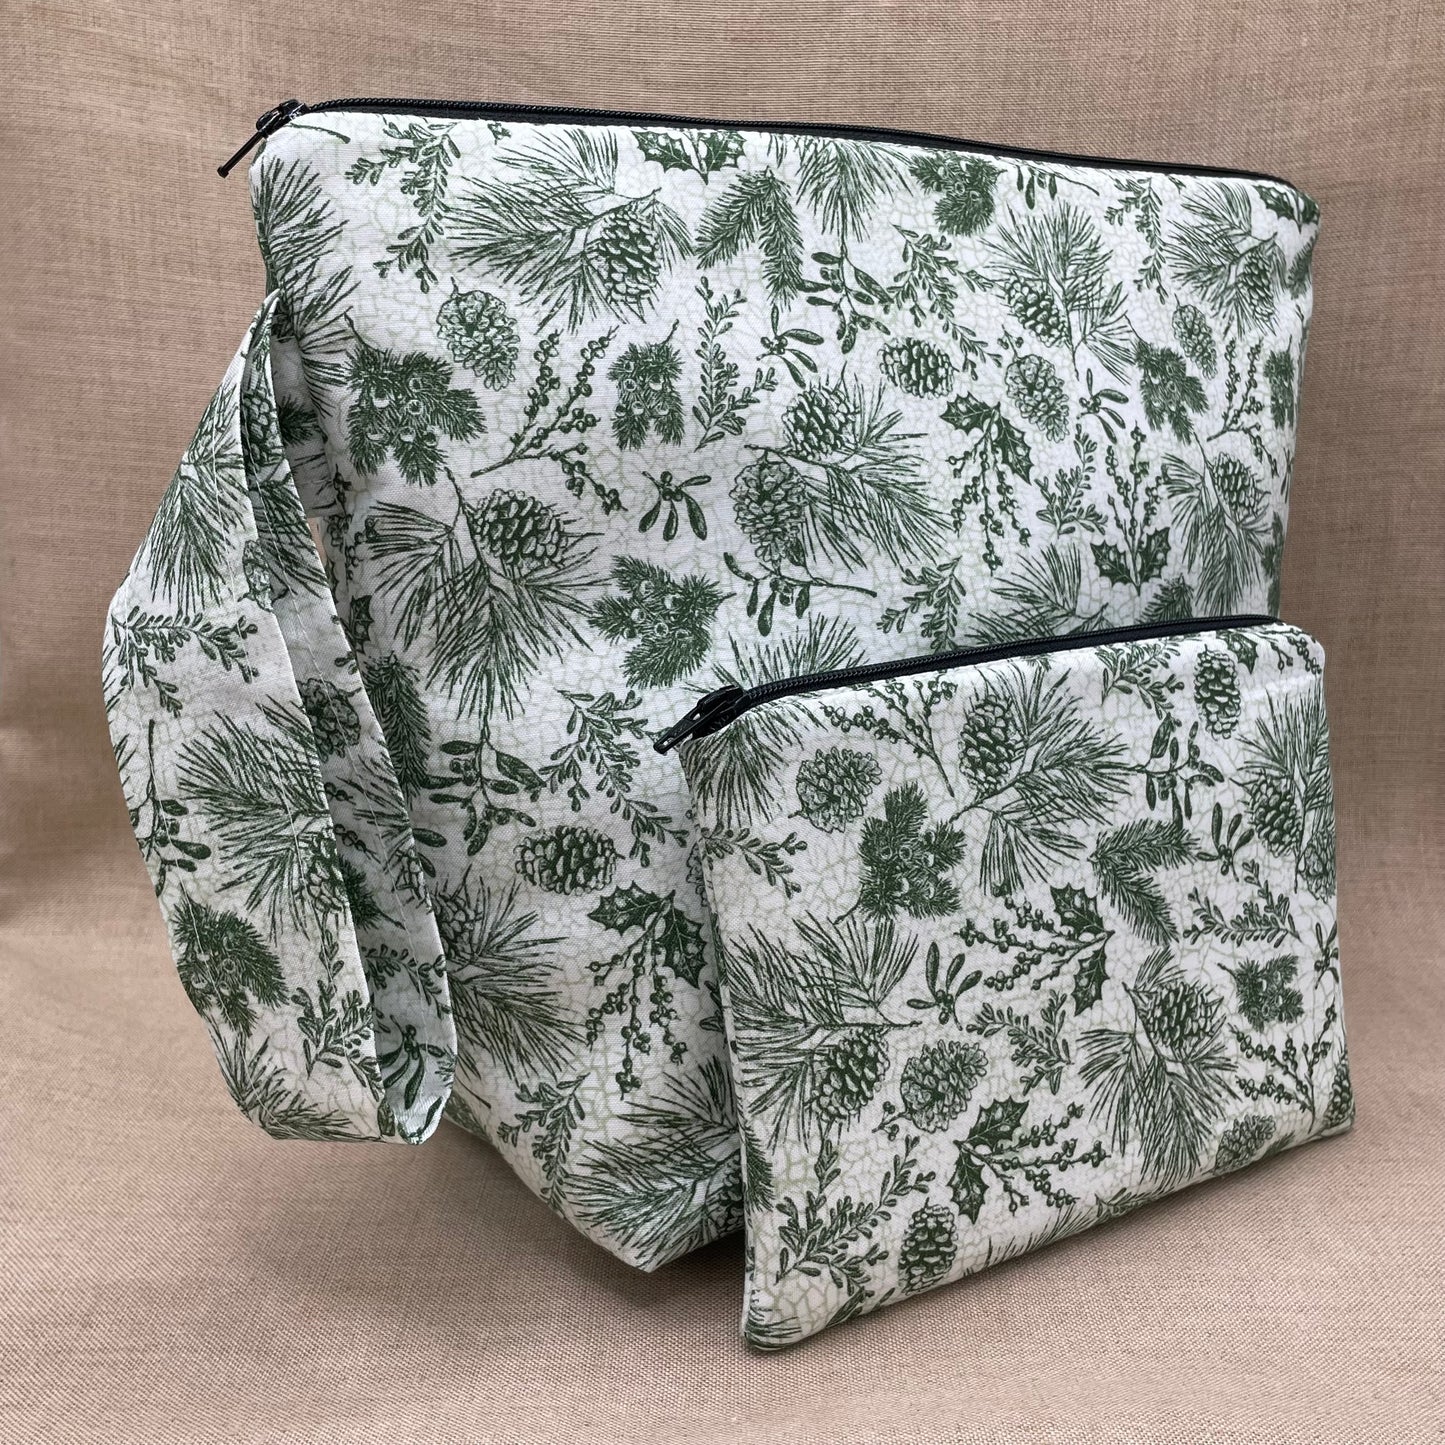 Frosty Foliage Medium Wedgetote with Coordinating Notions Pouch